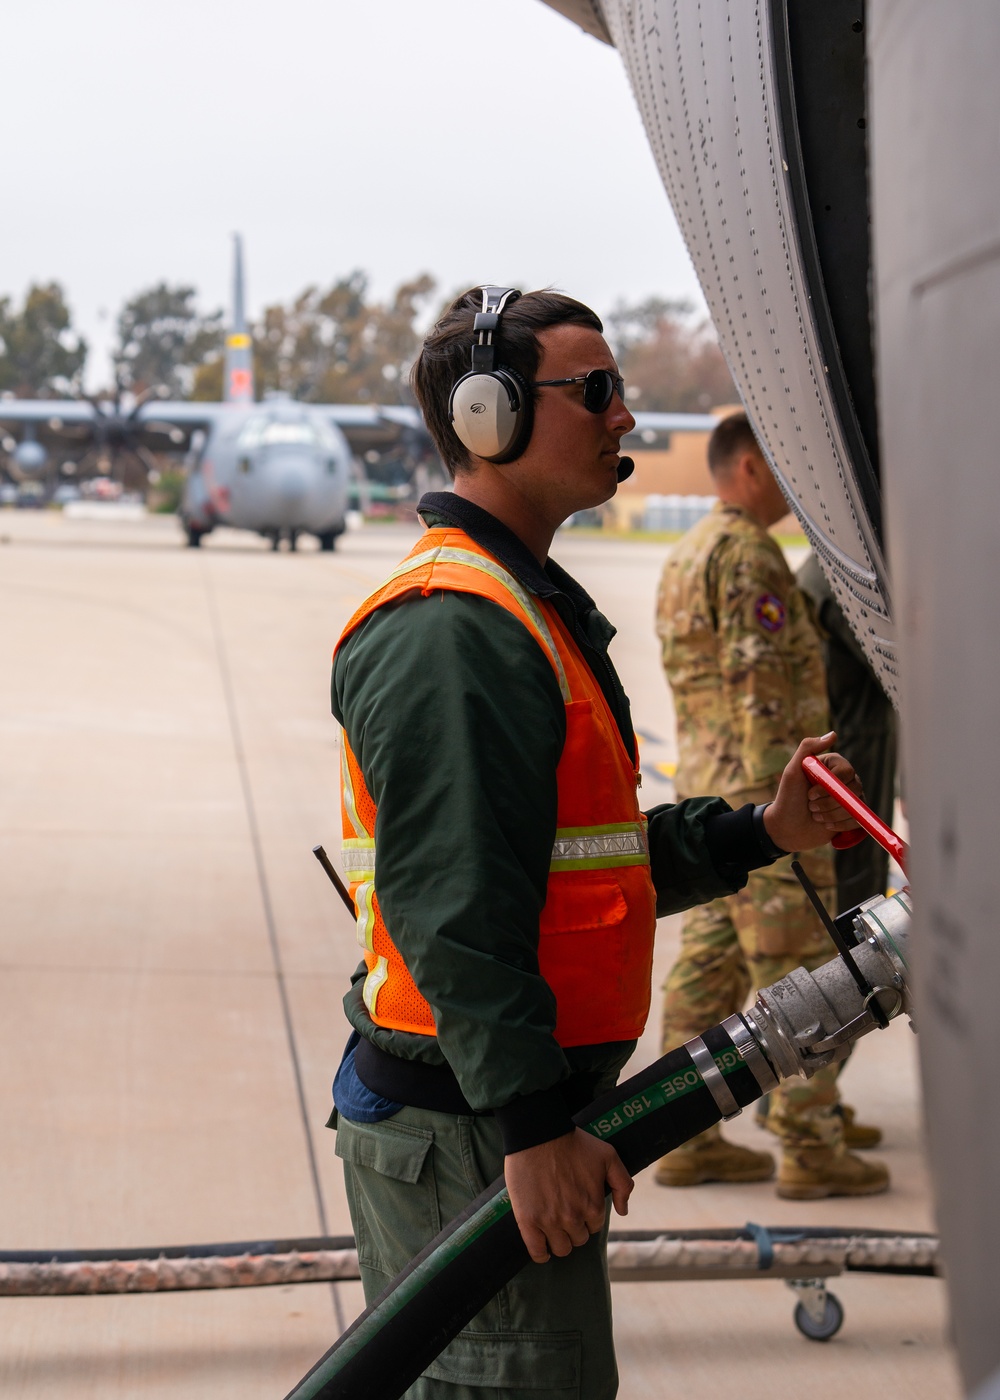 Joseph Matte with the U.S. Forest Service charges a Modular Airborne Fire Fighting unit during 2023 MAFFS spring training